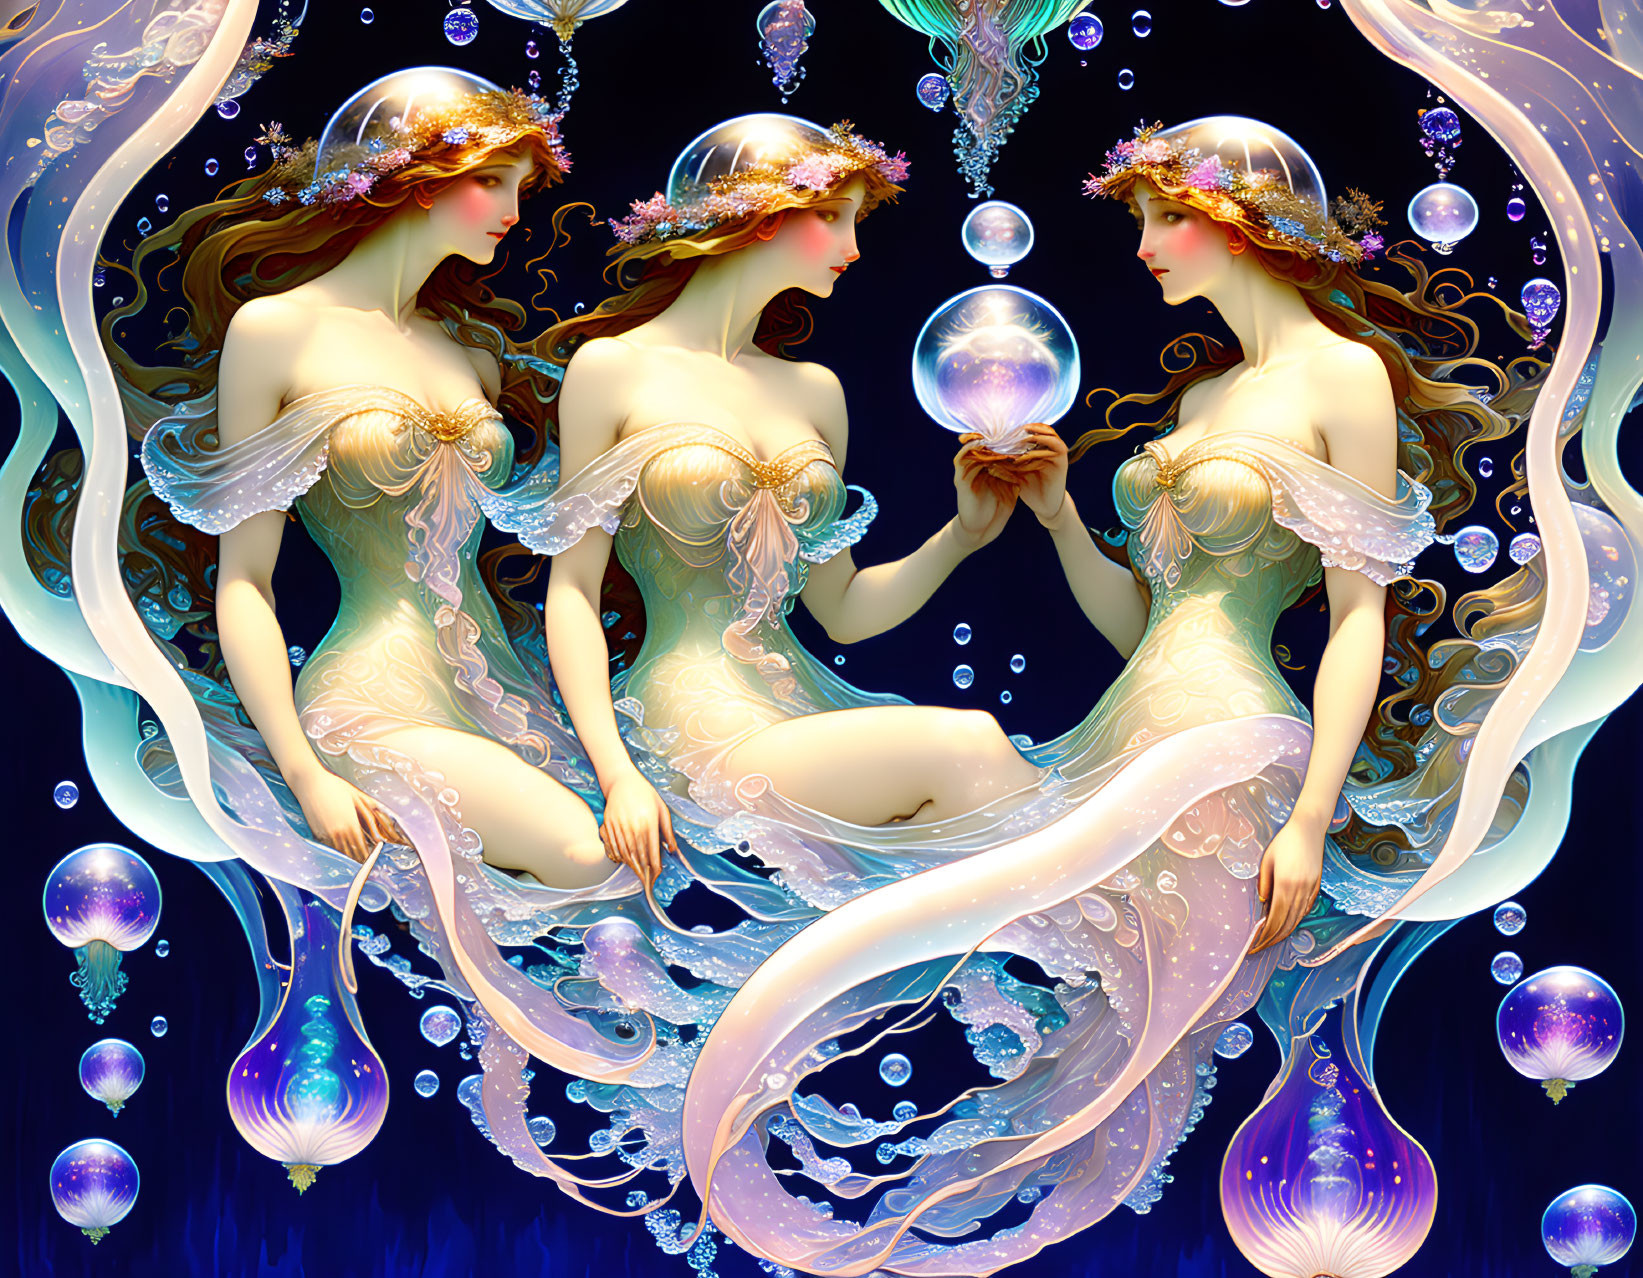 Ethereal women in aquatic attire with glowing orb and bubbles on dark blue background